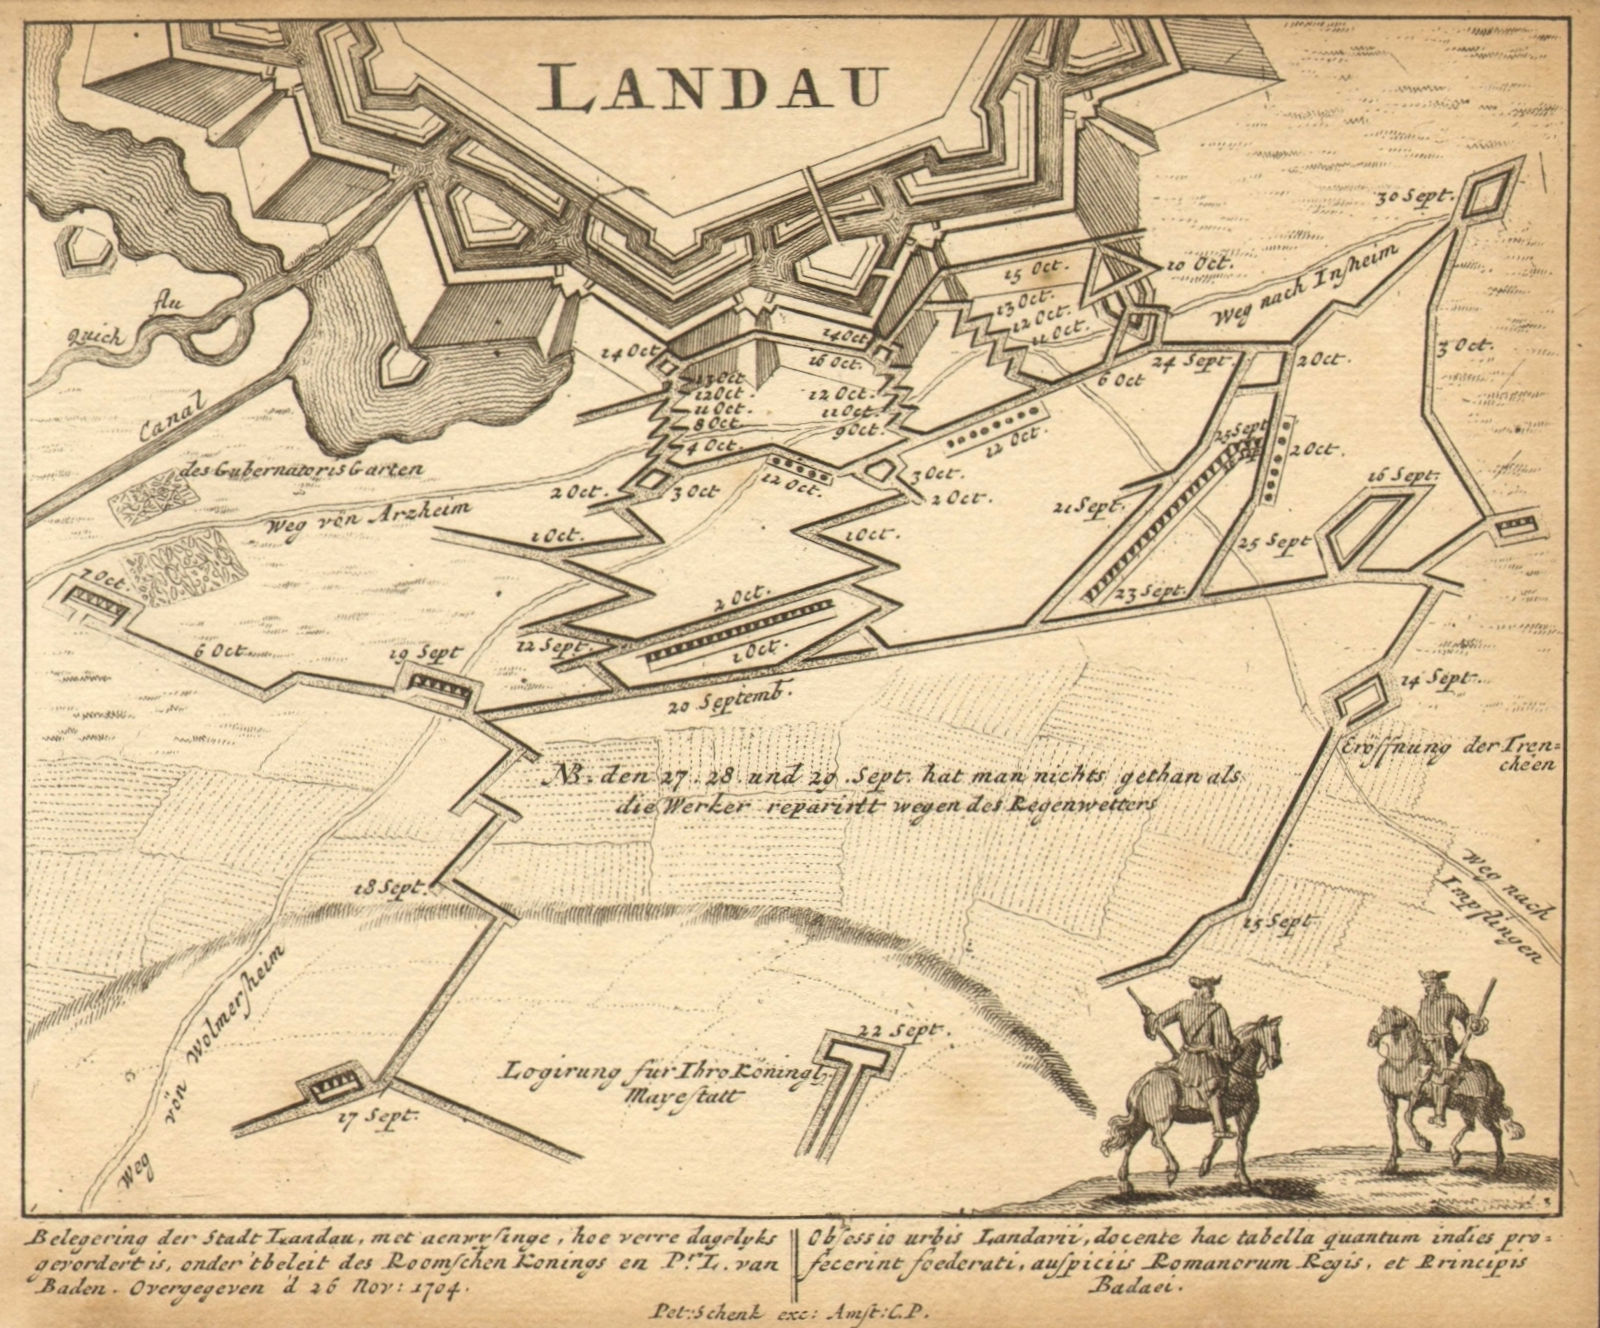 Associate Product LANDAU. Town plan by Schenk. Scarce. Germany 1710 old antique map chart